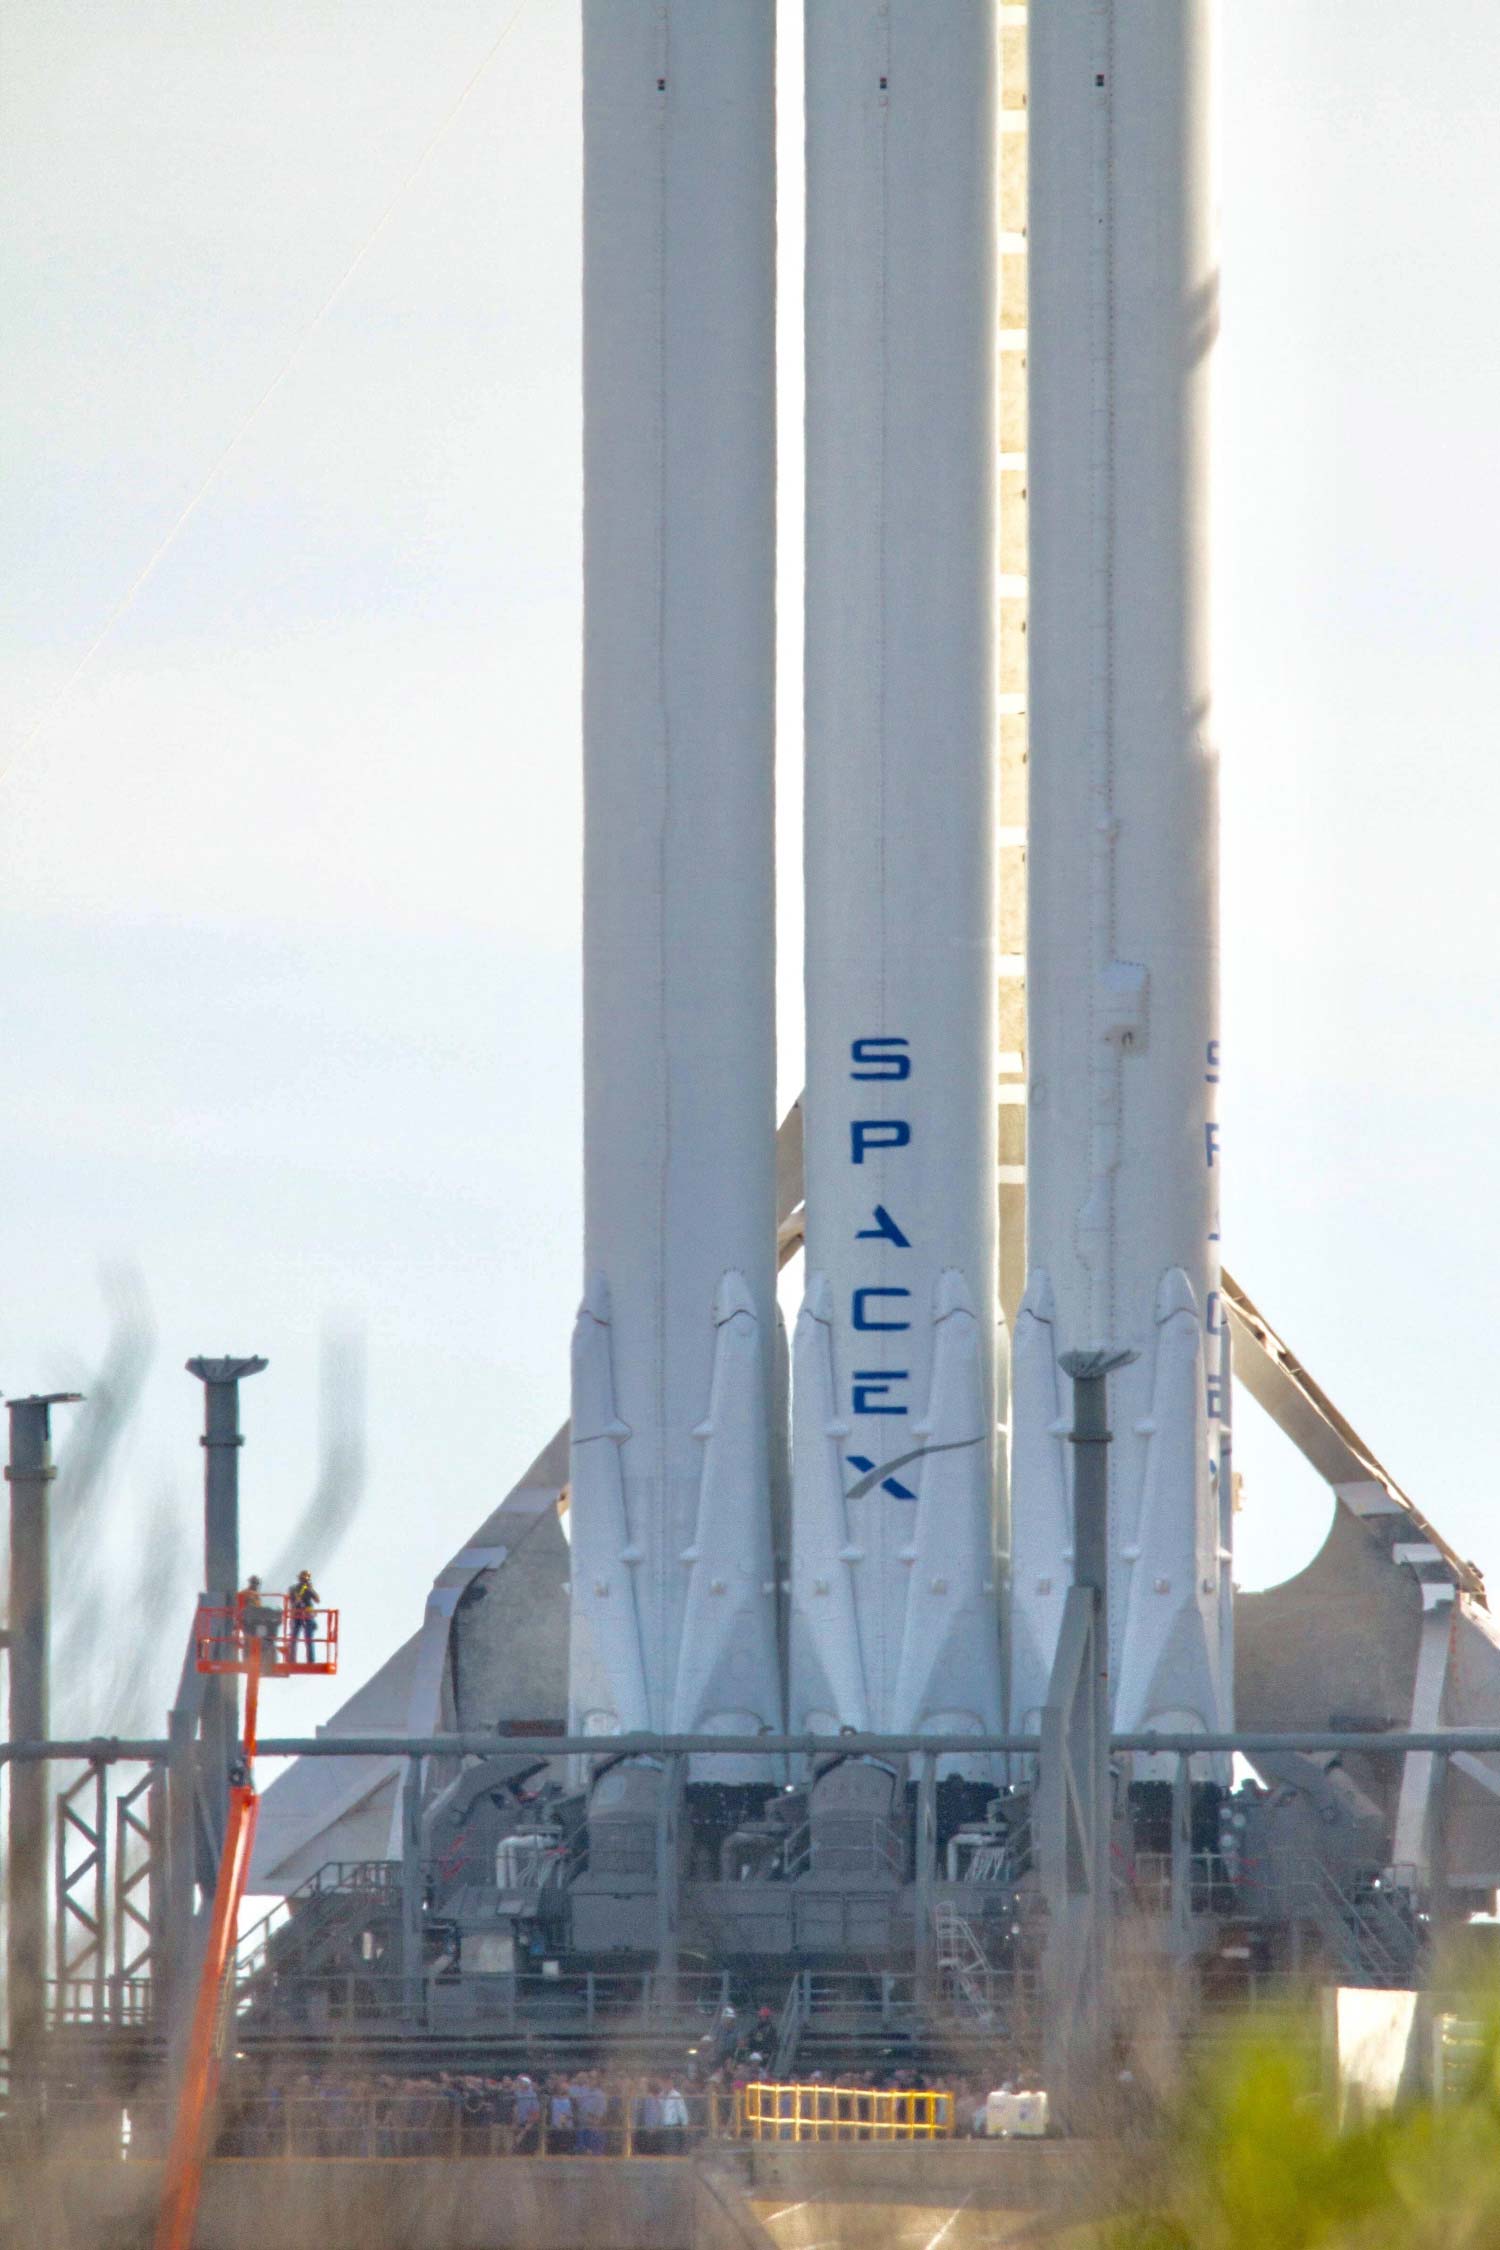 SpaceX Falcon Heavy (humans for scale)